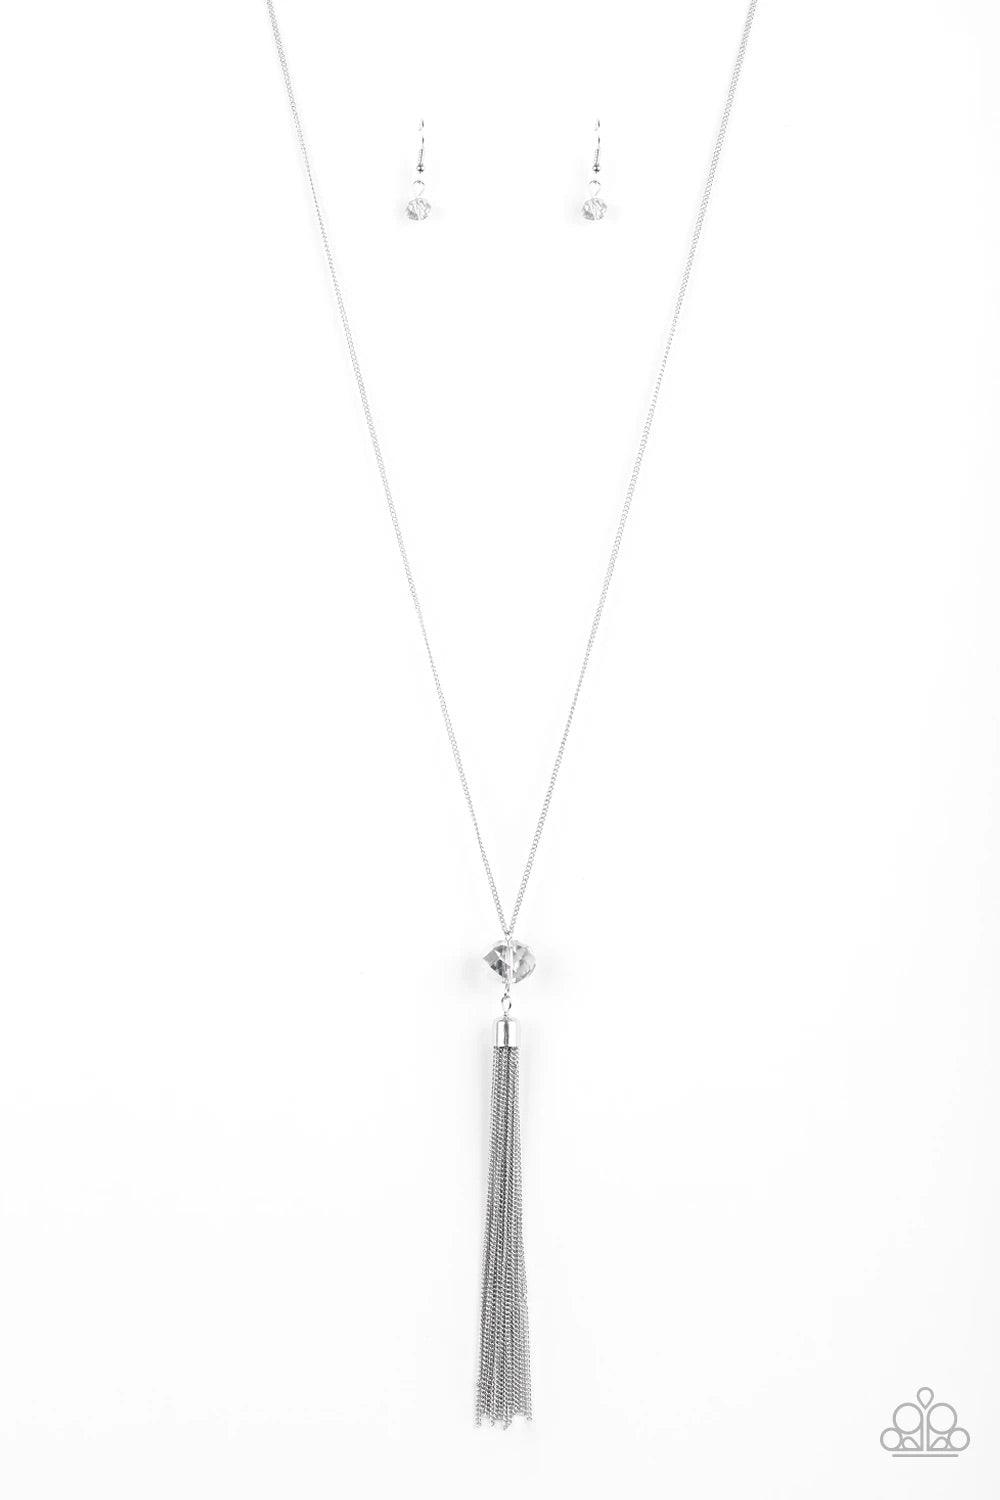 Paparazzi Accessories Socialite of the Season - Silver Splashed in metallic shimmer, a smoky crystal-like bead swings from the bottom of a lengthened silver chain, giving way to a shimmering silver tassel for a glamorous finish. Features an adjustable cla